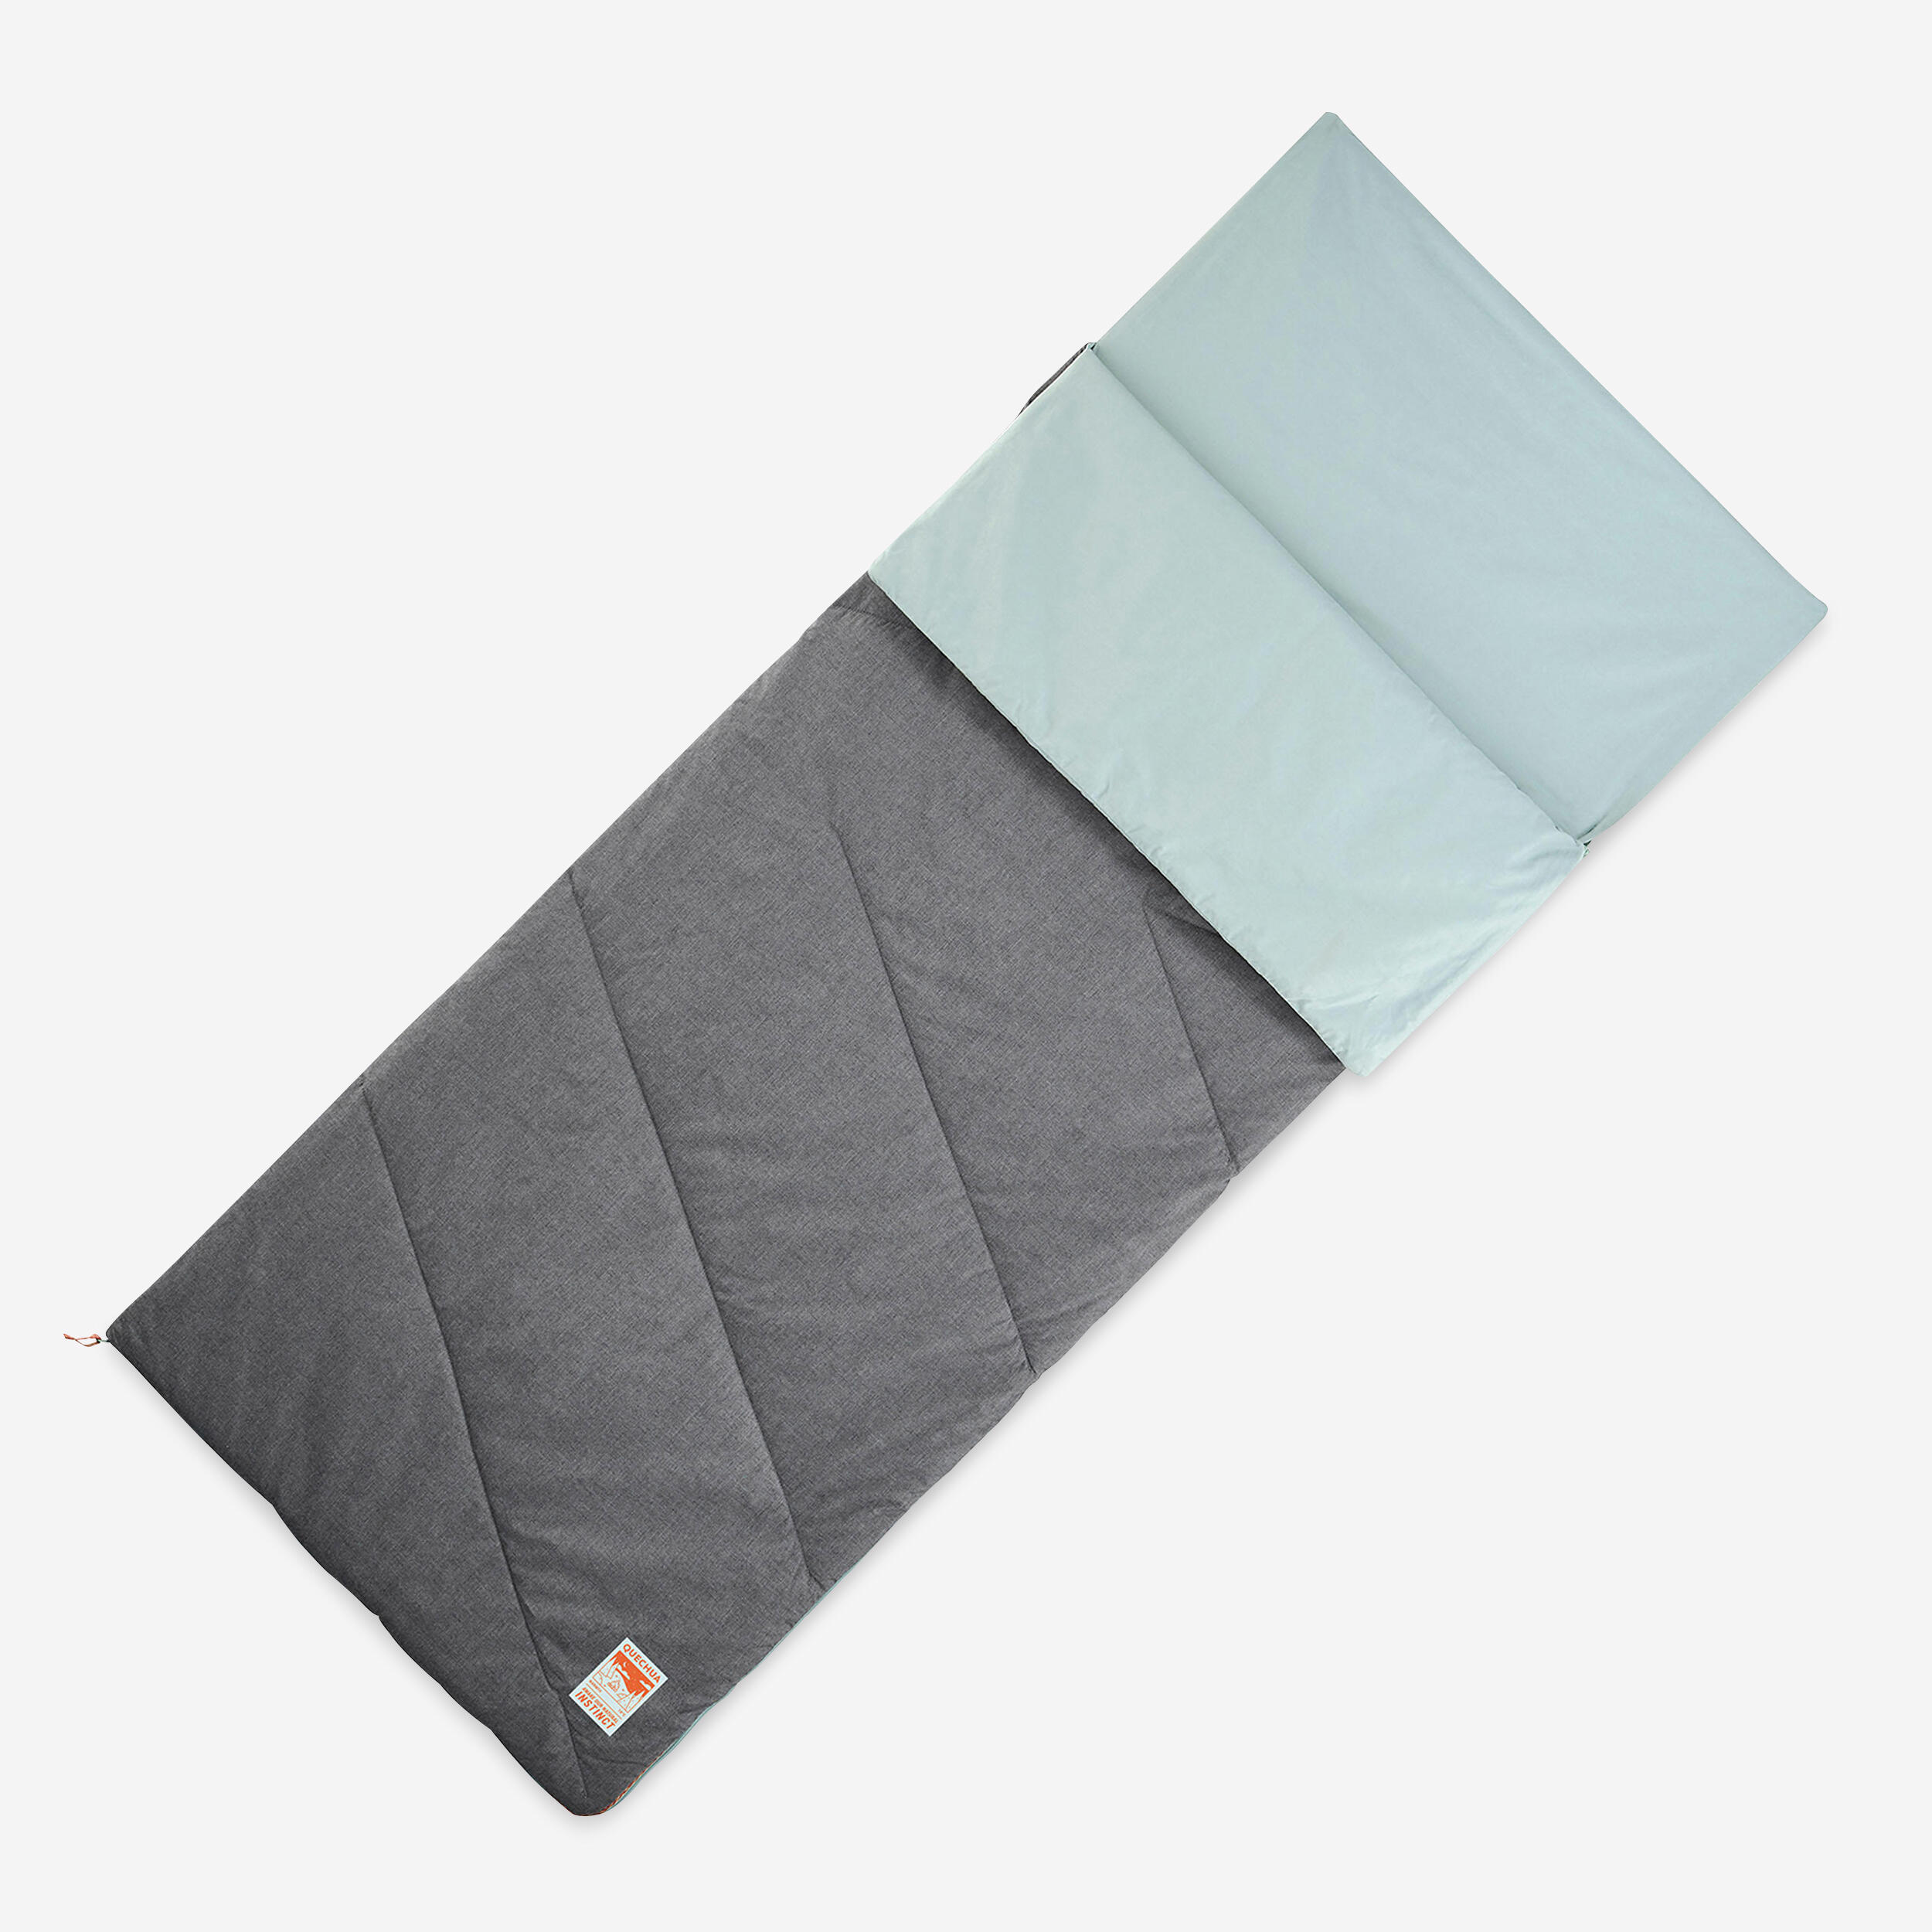 COTTON SLEEPING BAG FOR CAMPING - ARPENAZ 20° COTTON 1/9